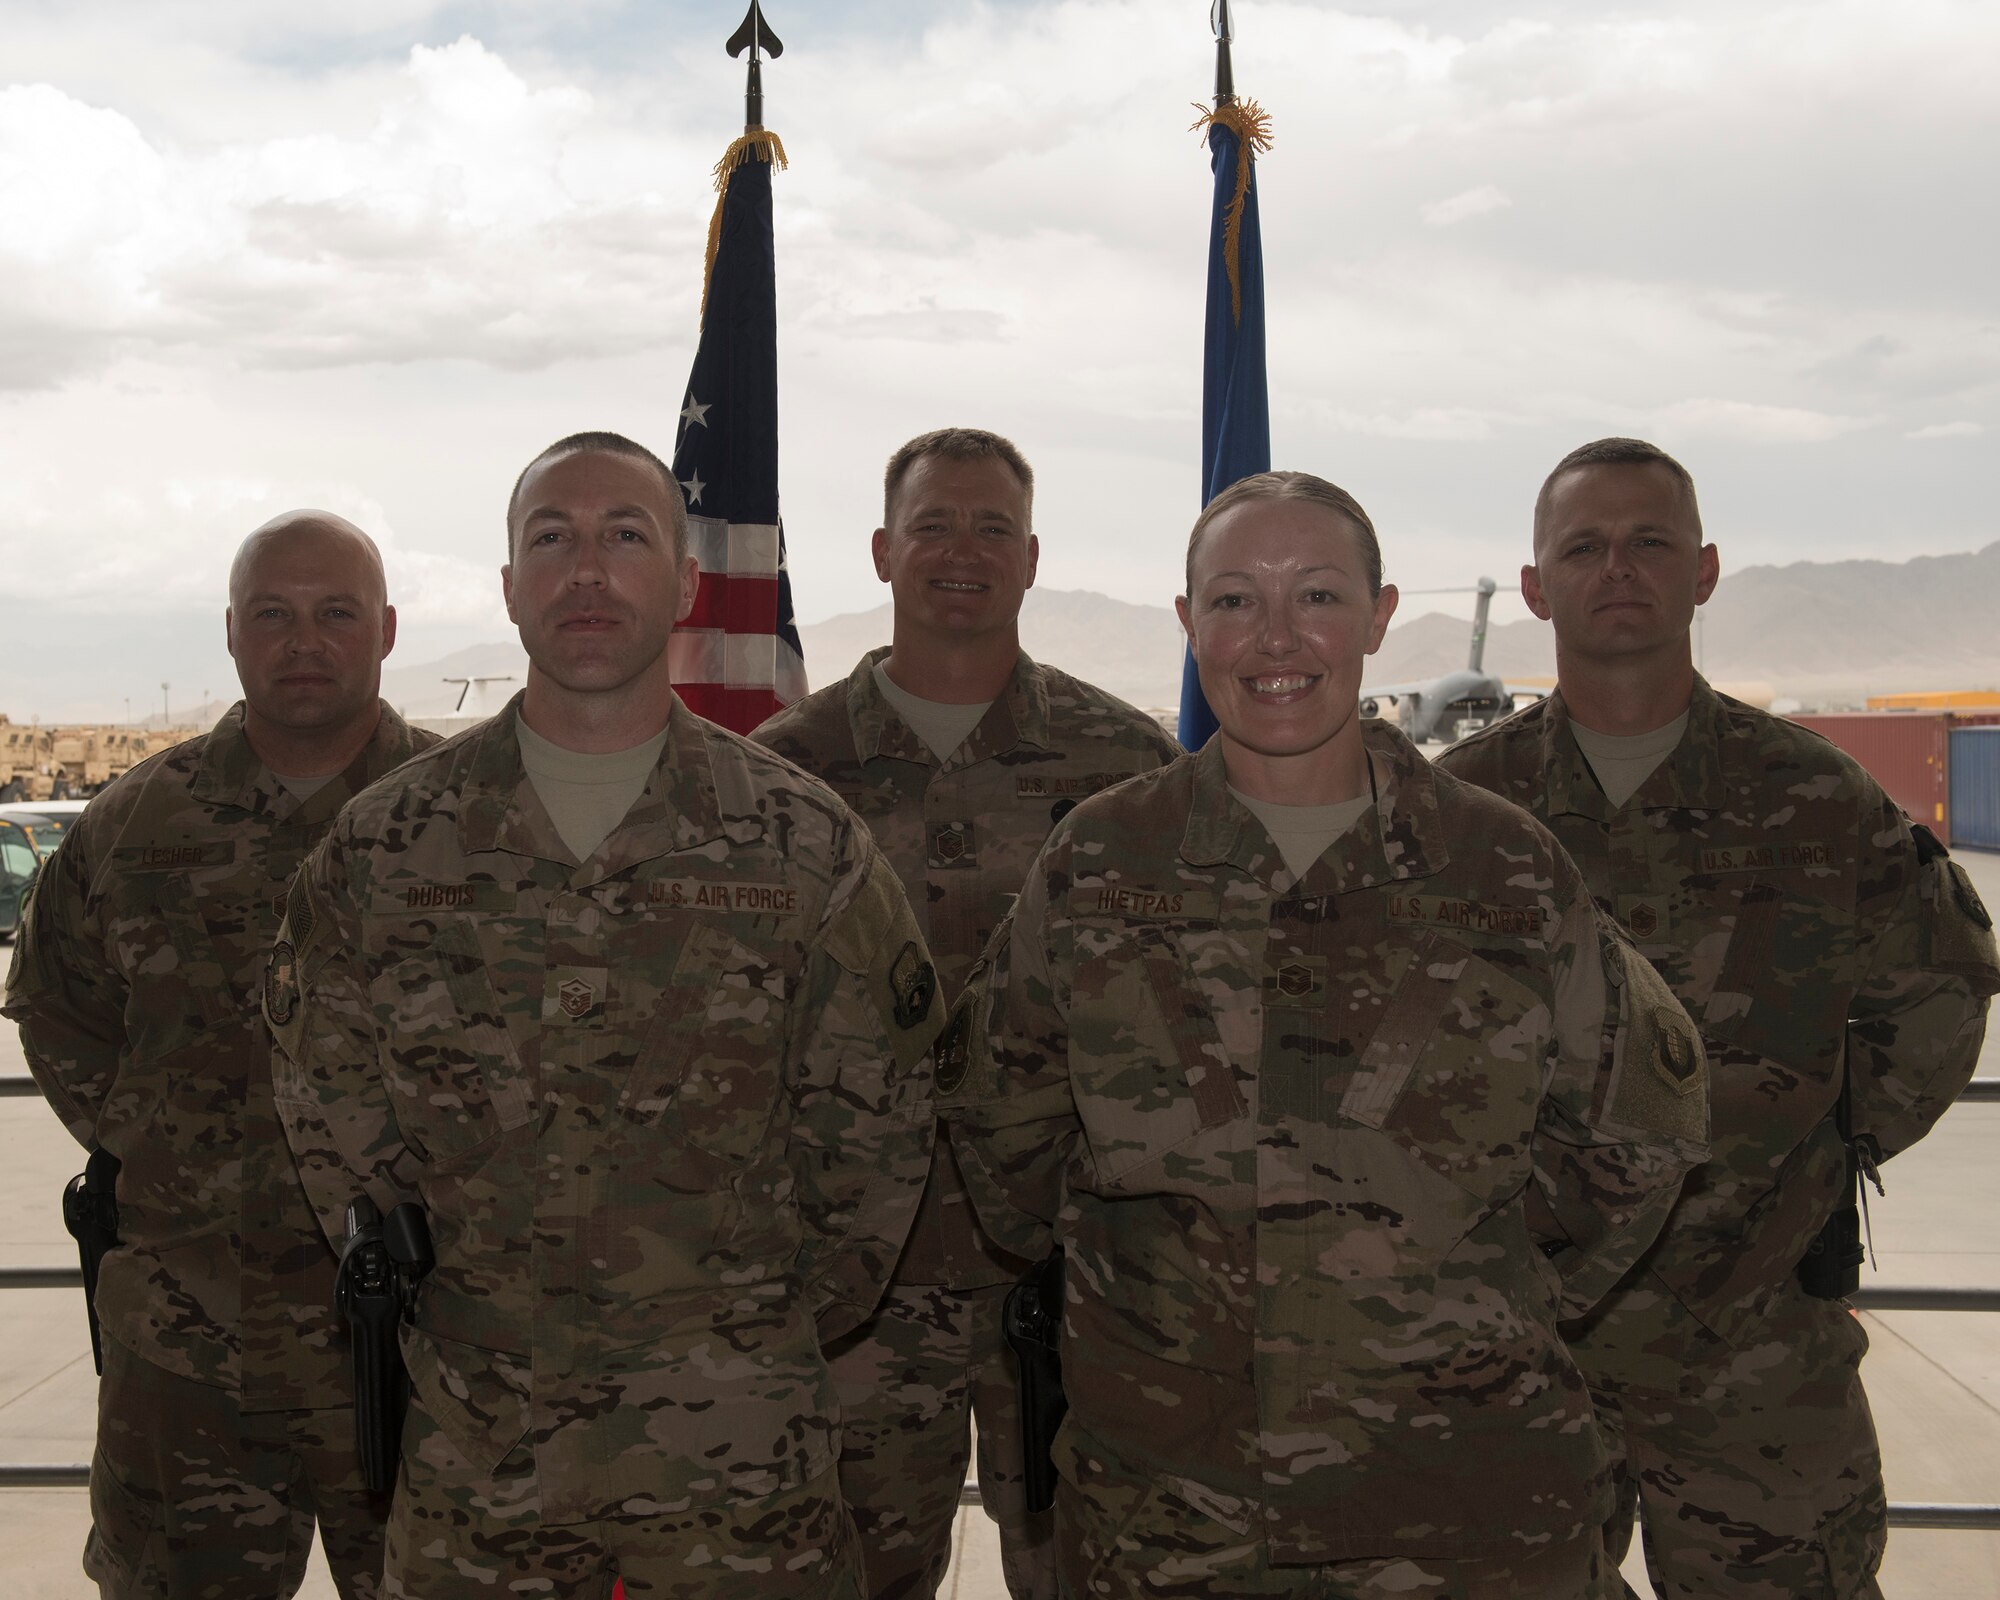 (From left to right) Master Sgt. Aaron Lesher, 455th Expeditionary Logistics Readiness Squadron, Master Sgt. Troy Dubois, 455th Expeditionary Security Forces Squadron, Master Sgt. James Pruitt, 455th Expeditionary Medical Group, Lisa Hietpas, 455th Expeditionary Operations Group, and Senior Master Sgt. Michael Martin, 455th Expeditionary Maintenance Squadron, are all first sergeants from Barksdale Air Force Base, La., who deployed to Bagram Airfield, Afghanistan, at the same time. (U.S. Air Force photo by Staff Sgt. Benjamin Gonsier)